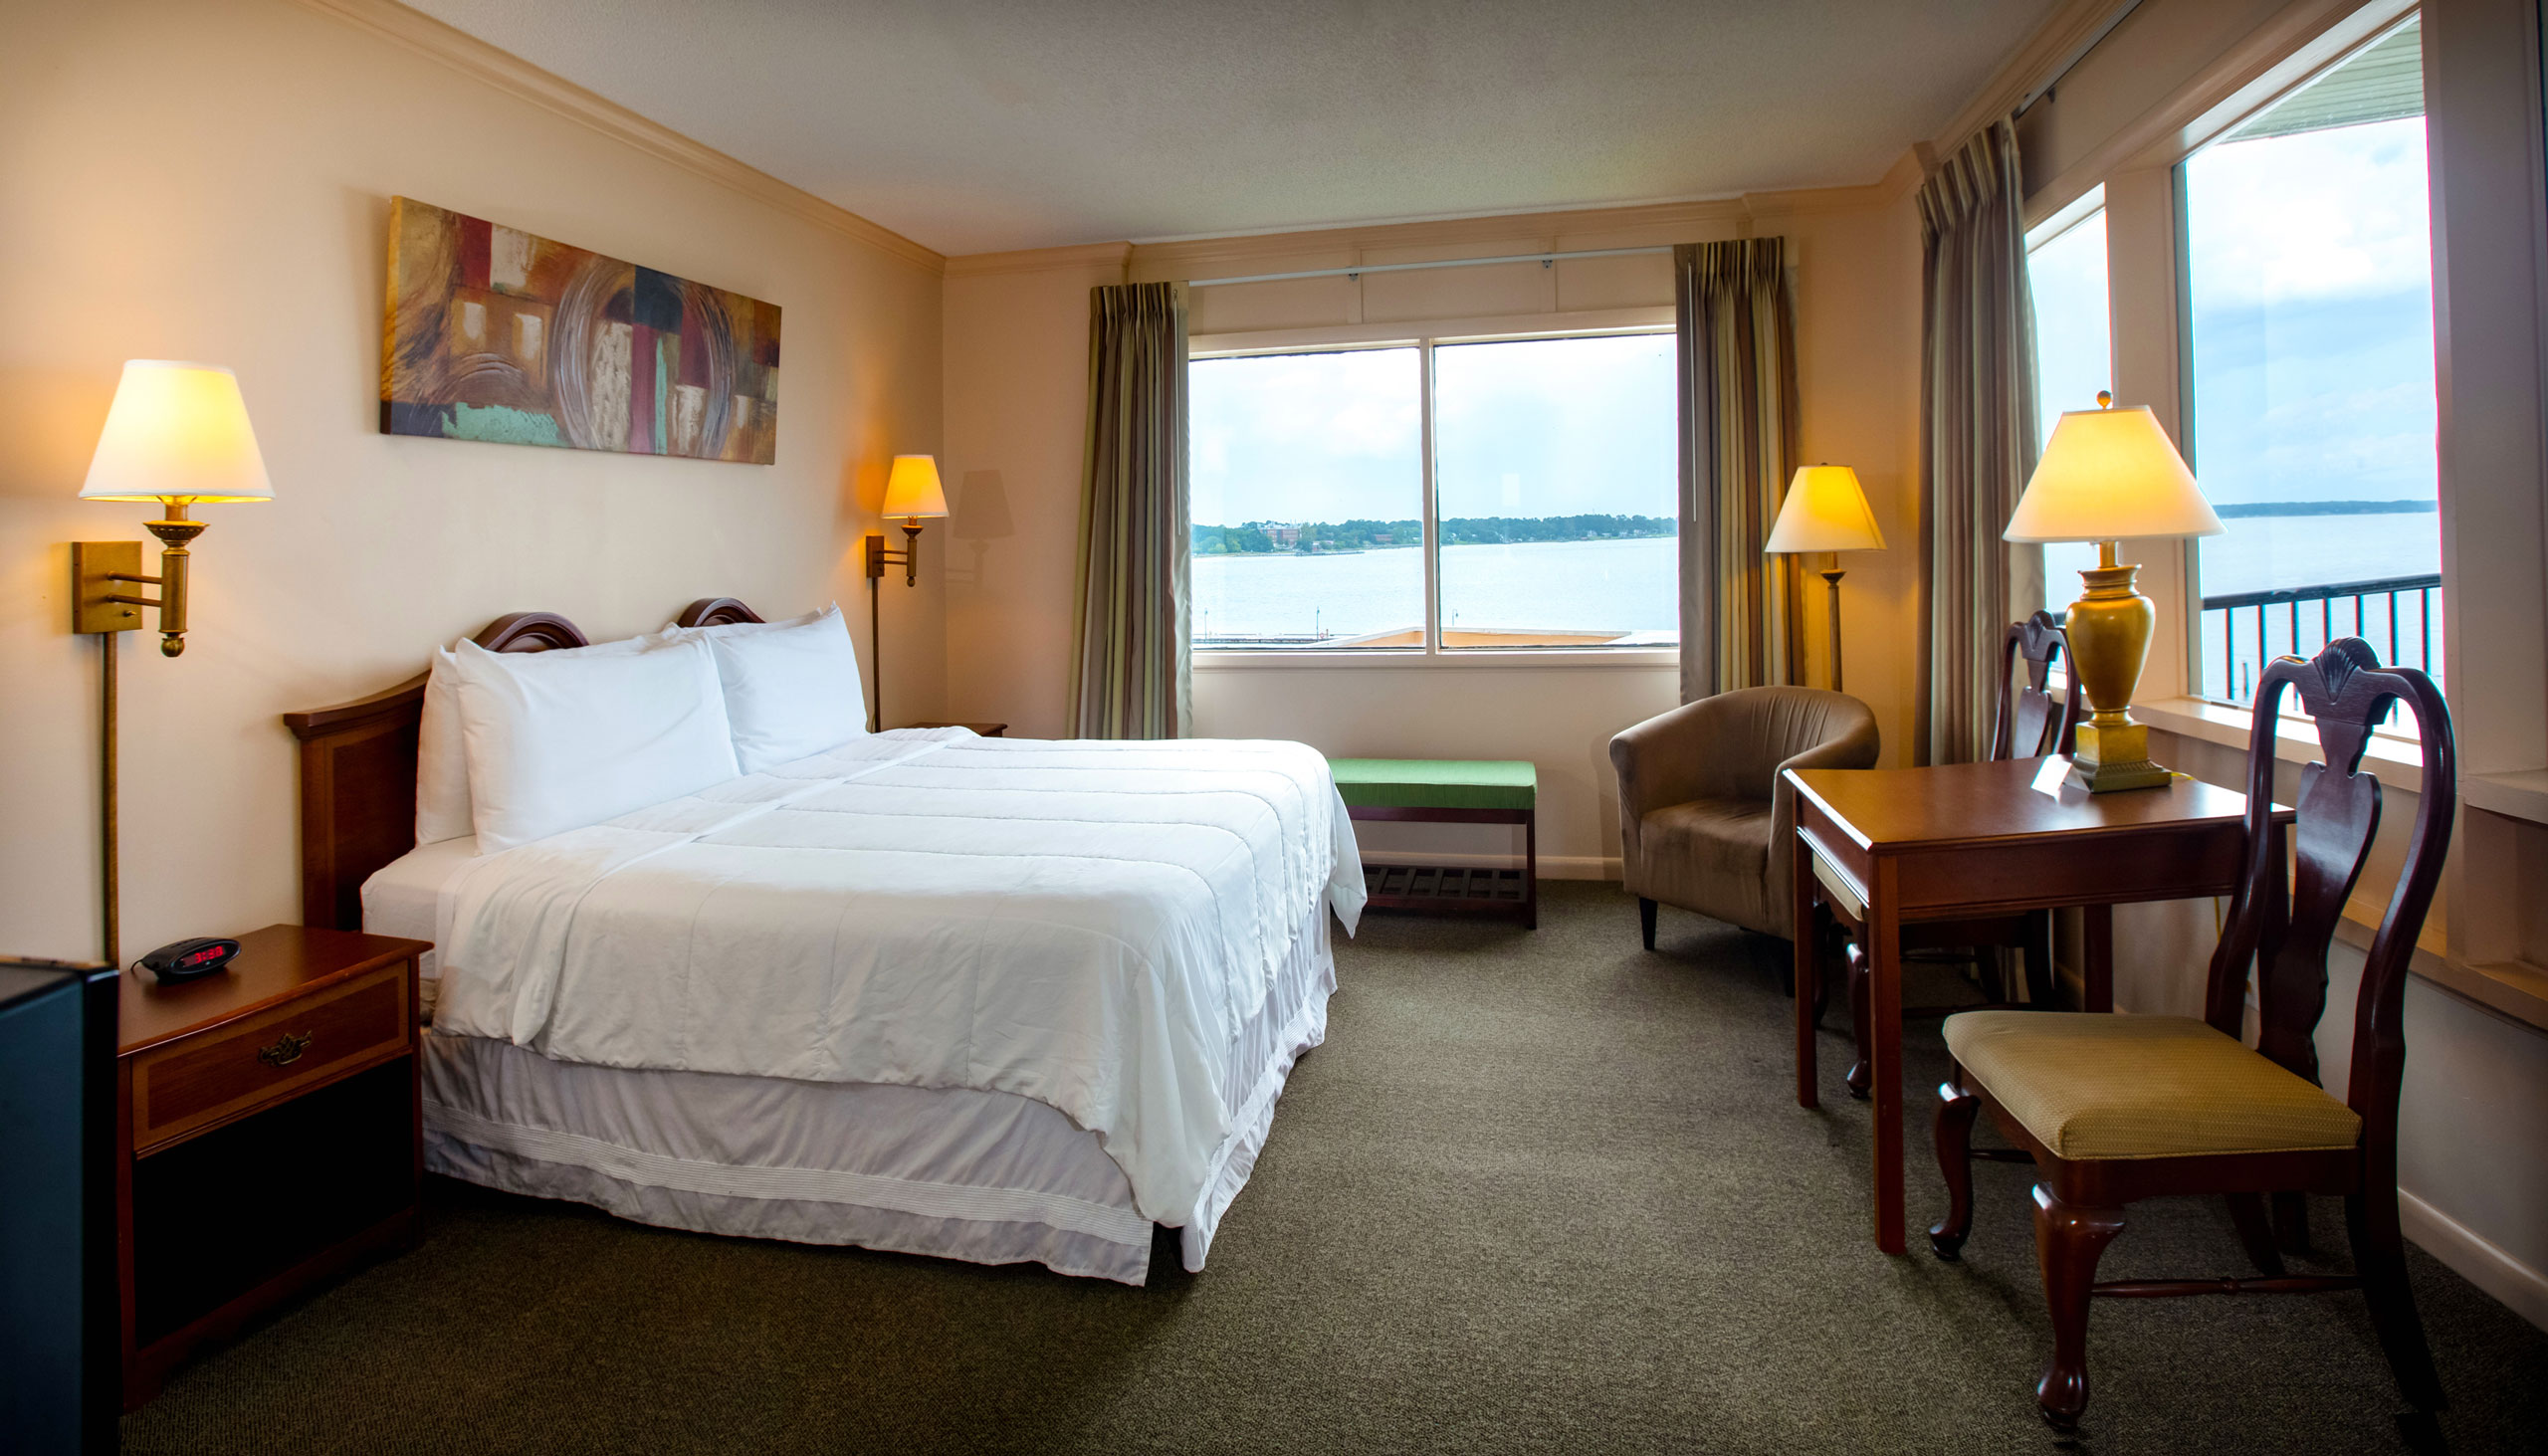 A spacious Yorktown hotel room with colonial green carpet, a king bed with white linens, a desk, and waterfront views.